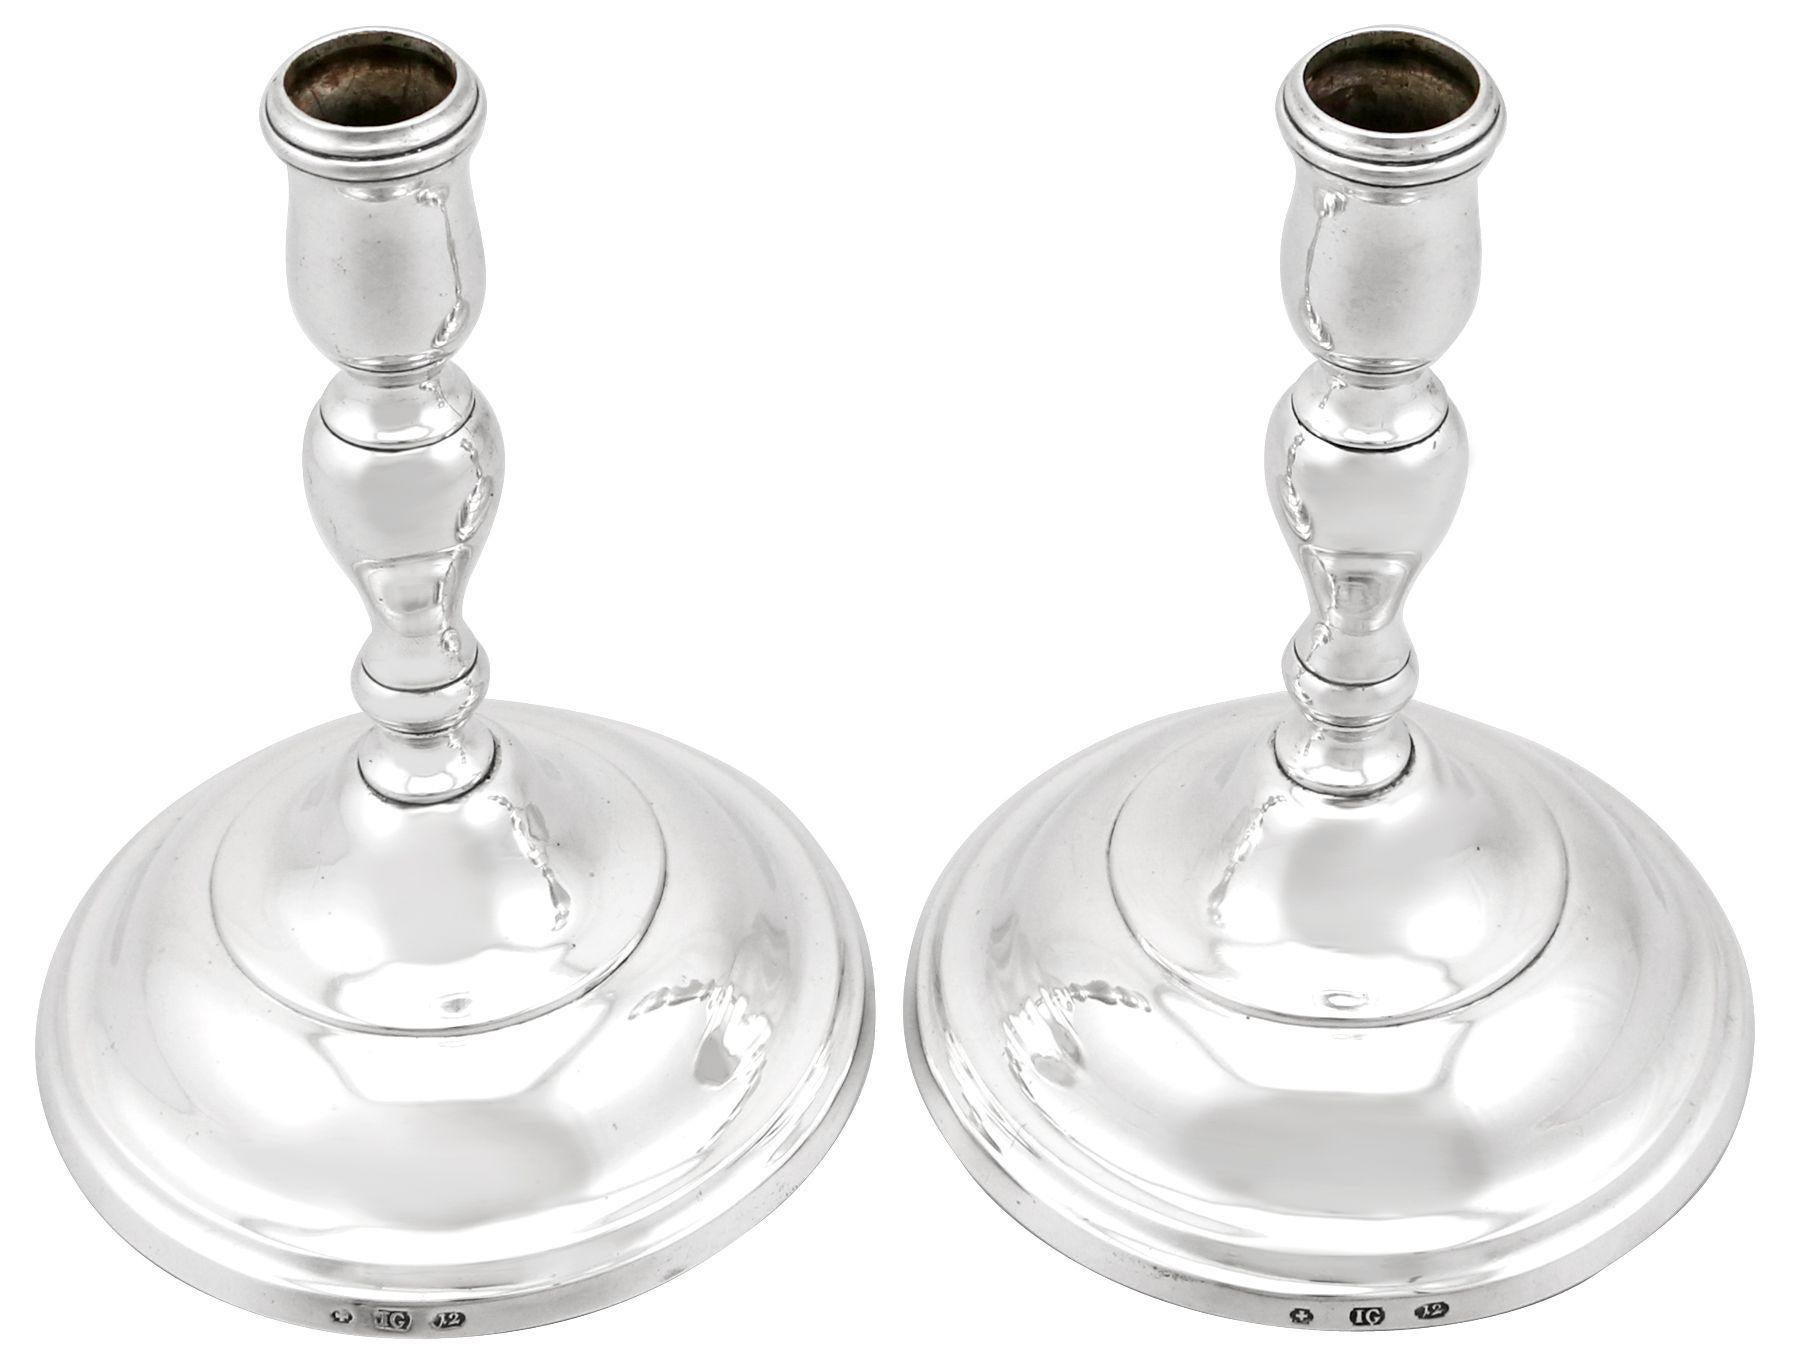 An exceptional, fine and impressive pair of antique Baltic silver candlesticks; an addition to our ornamental silverware collection

These exceptional antique silver candlesticks have a baluster, circular rounded form.

The Baltic* candlesticks have